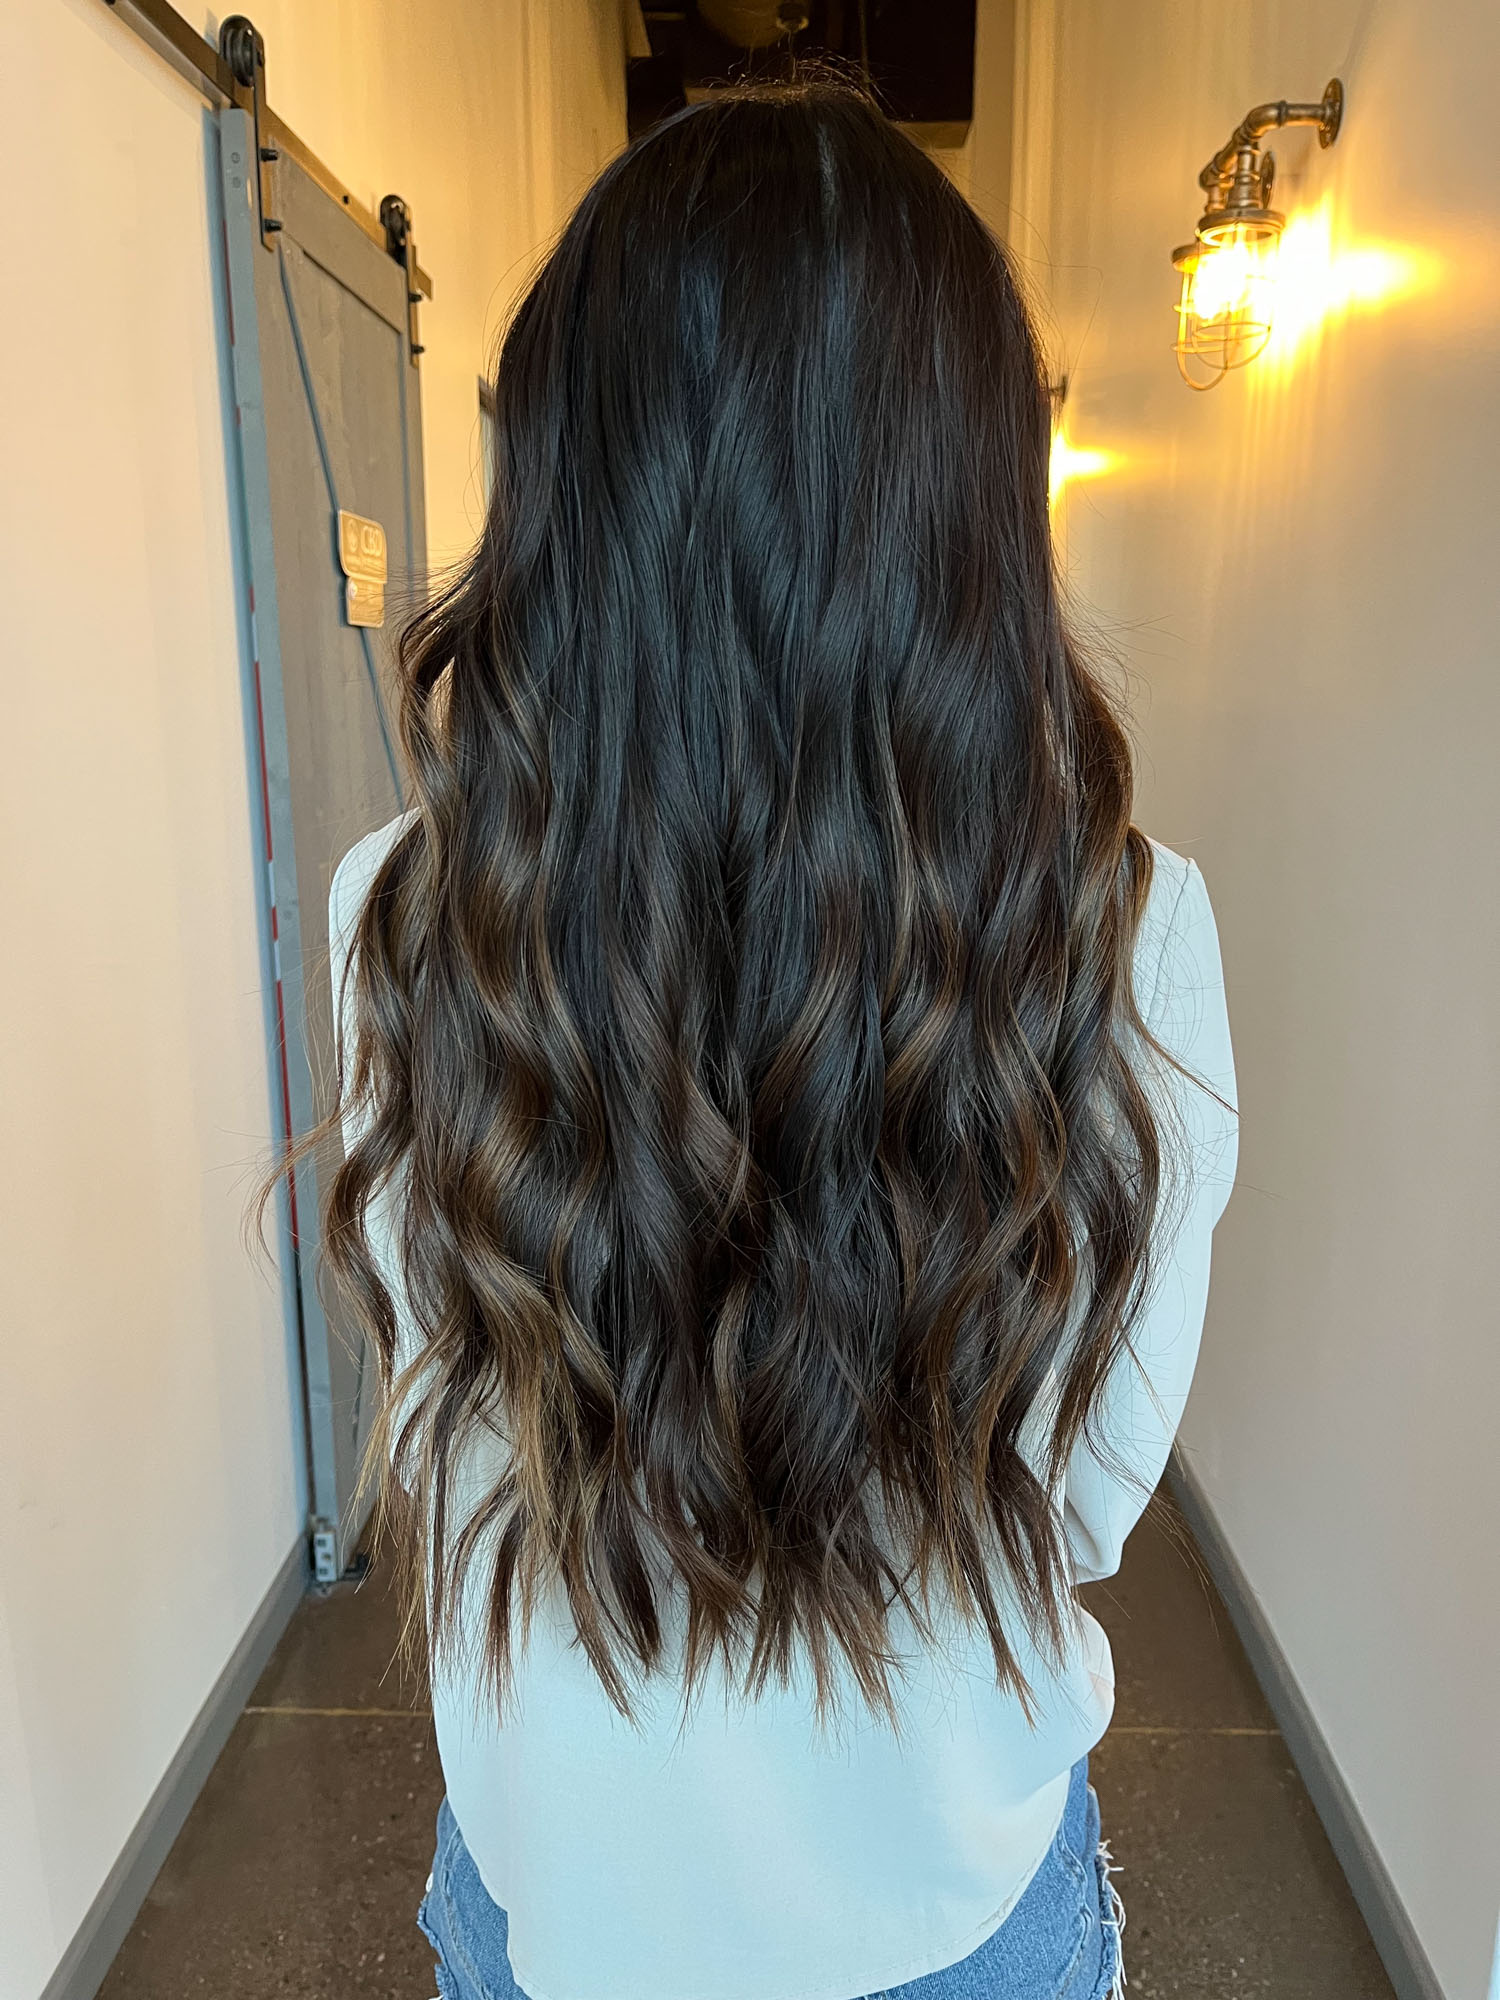 Arizona influencer Demi Bang shares pros and cons of having hand-tied weft hair extensions.